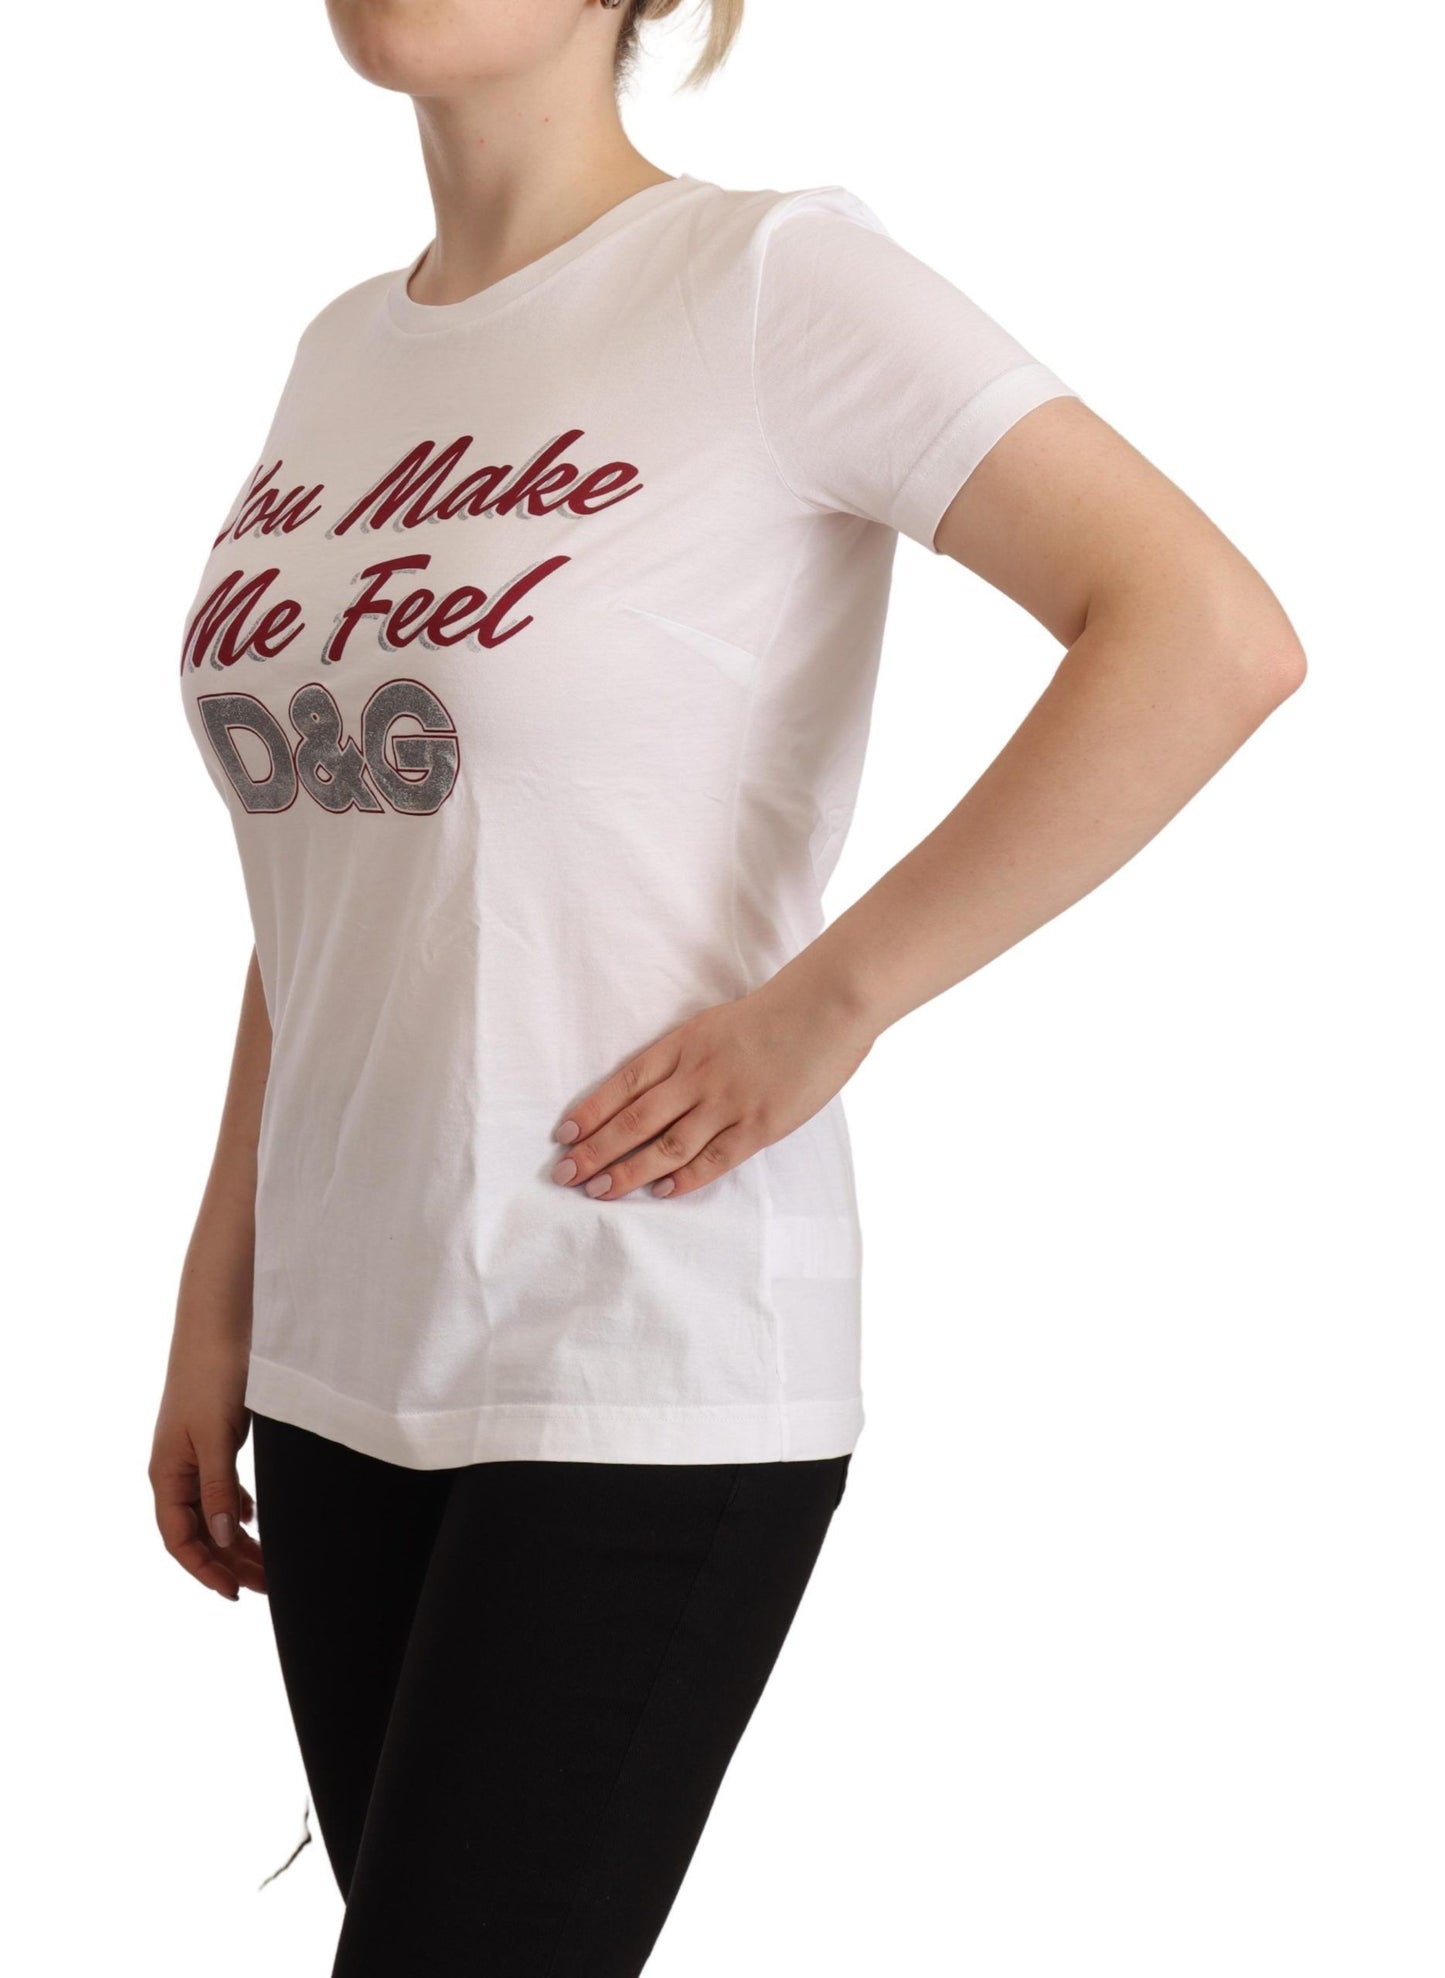 Chic White Cotton Tee with D&G Motif